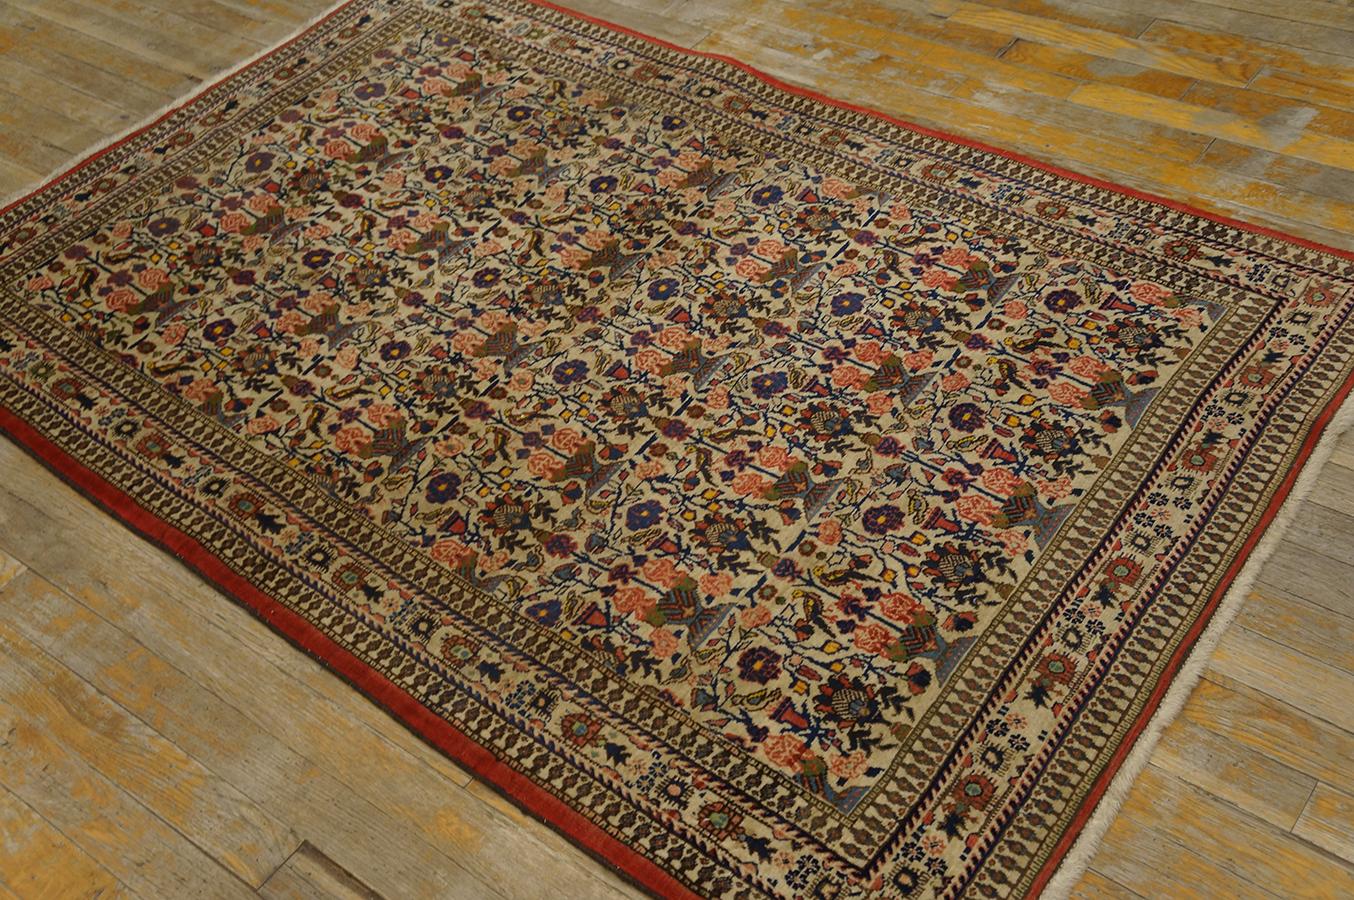 3 by 5 rug size